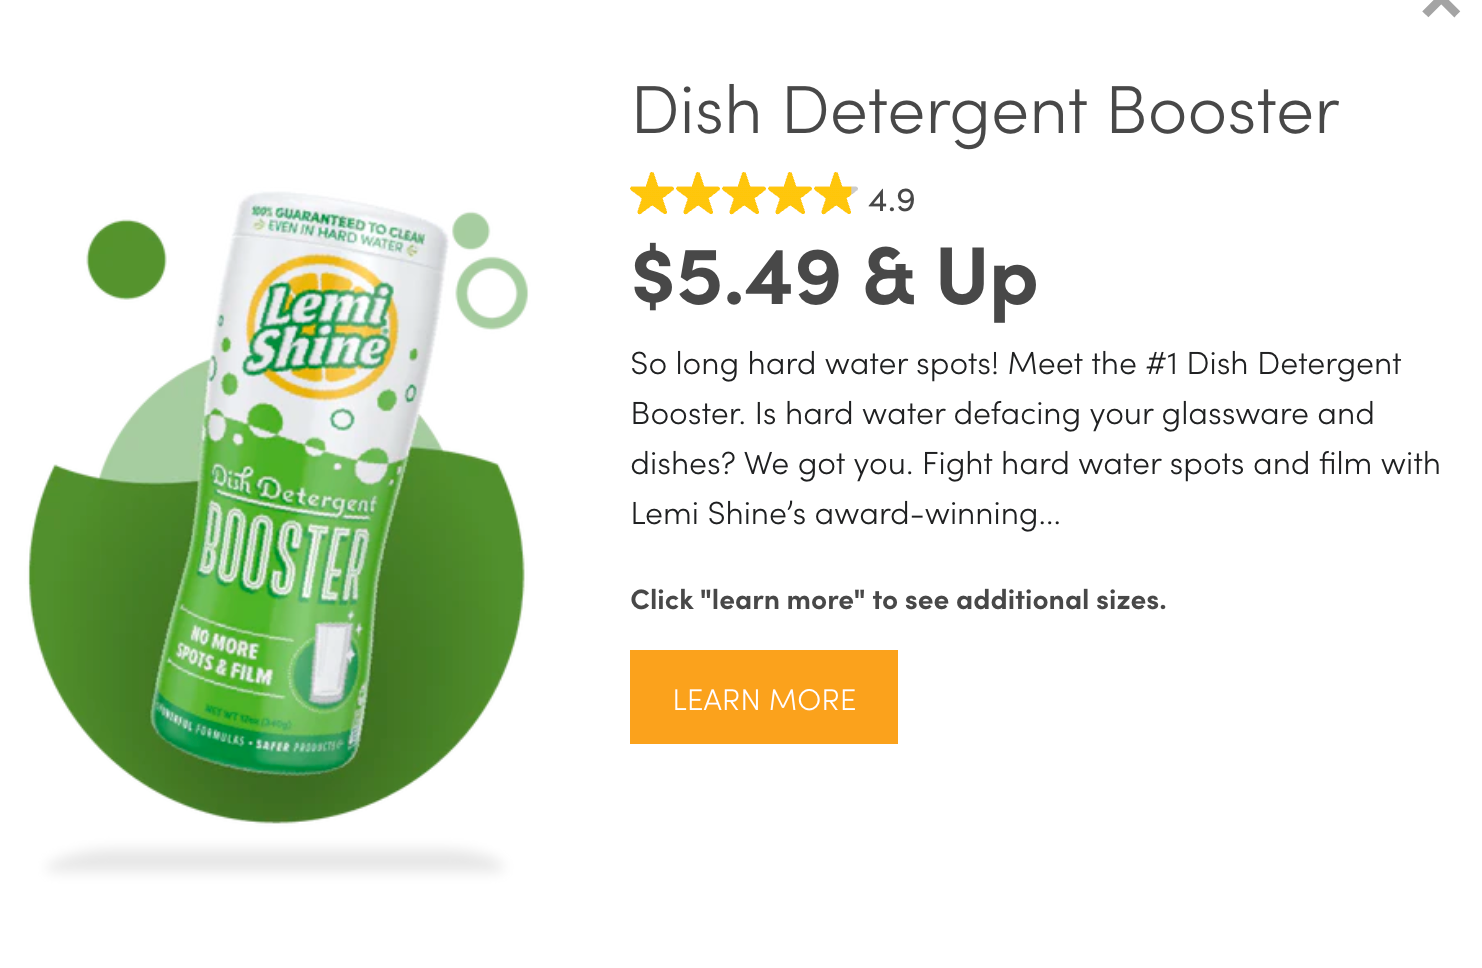 Lemi Shine Dish Detergent Booster $5.49 &amp;amp; Up, with a 4.9 out of 5 stars review